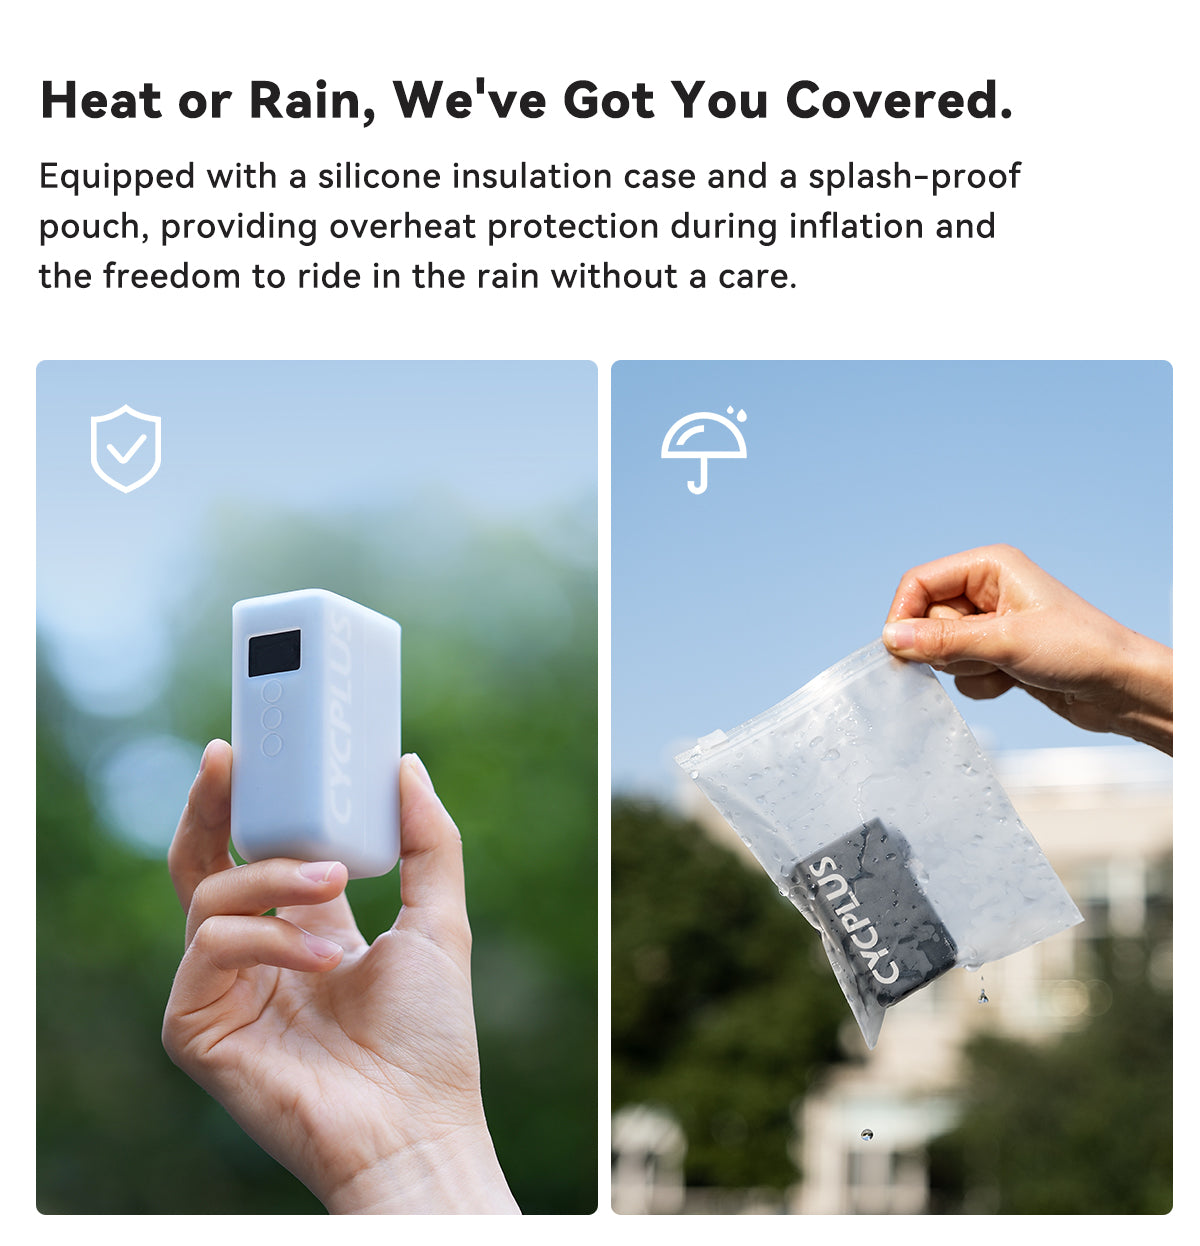 Heat or Rain, We've Got You Covered.  Equipped with a silicone insulation case and a waterproof pouch, providing overheat protection during inflation and the freedom to ride in the rain without a care.